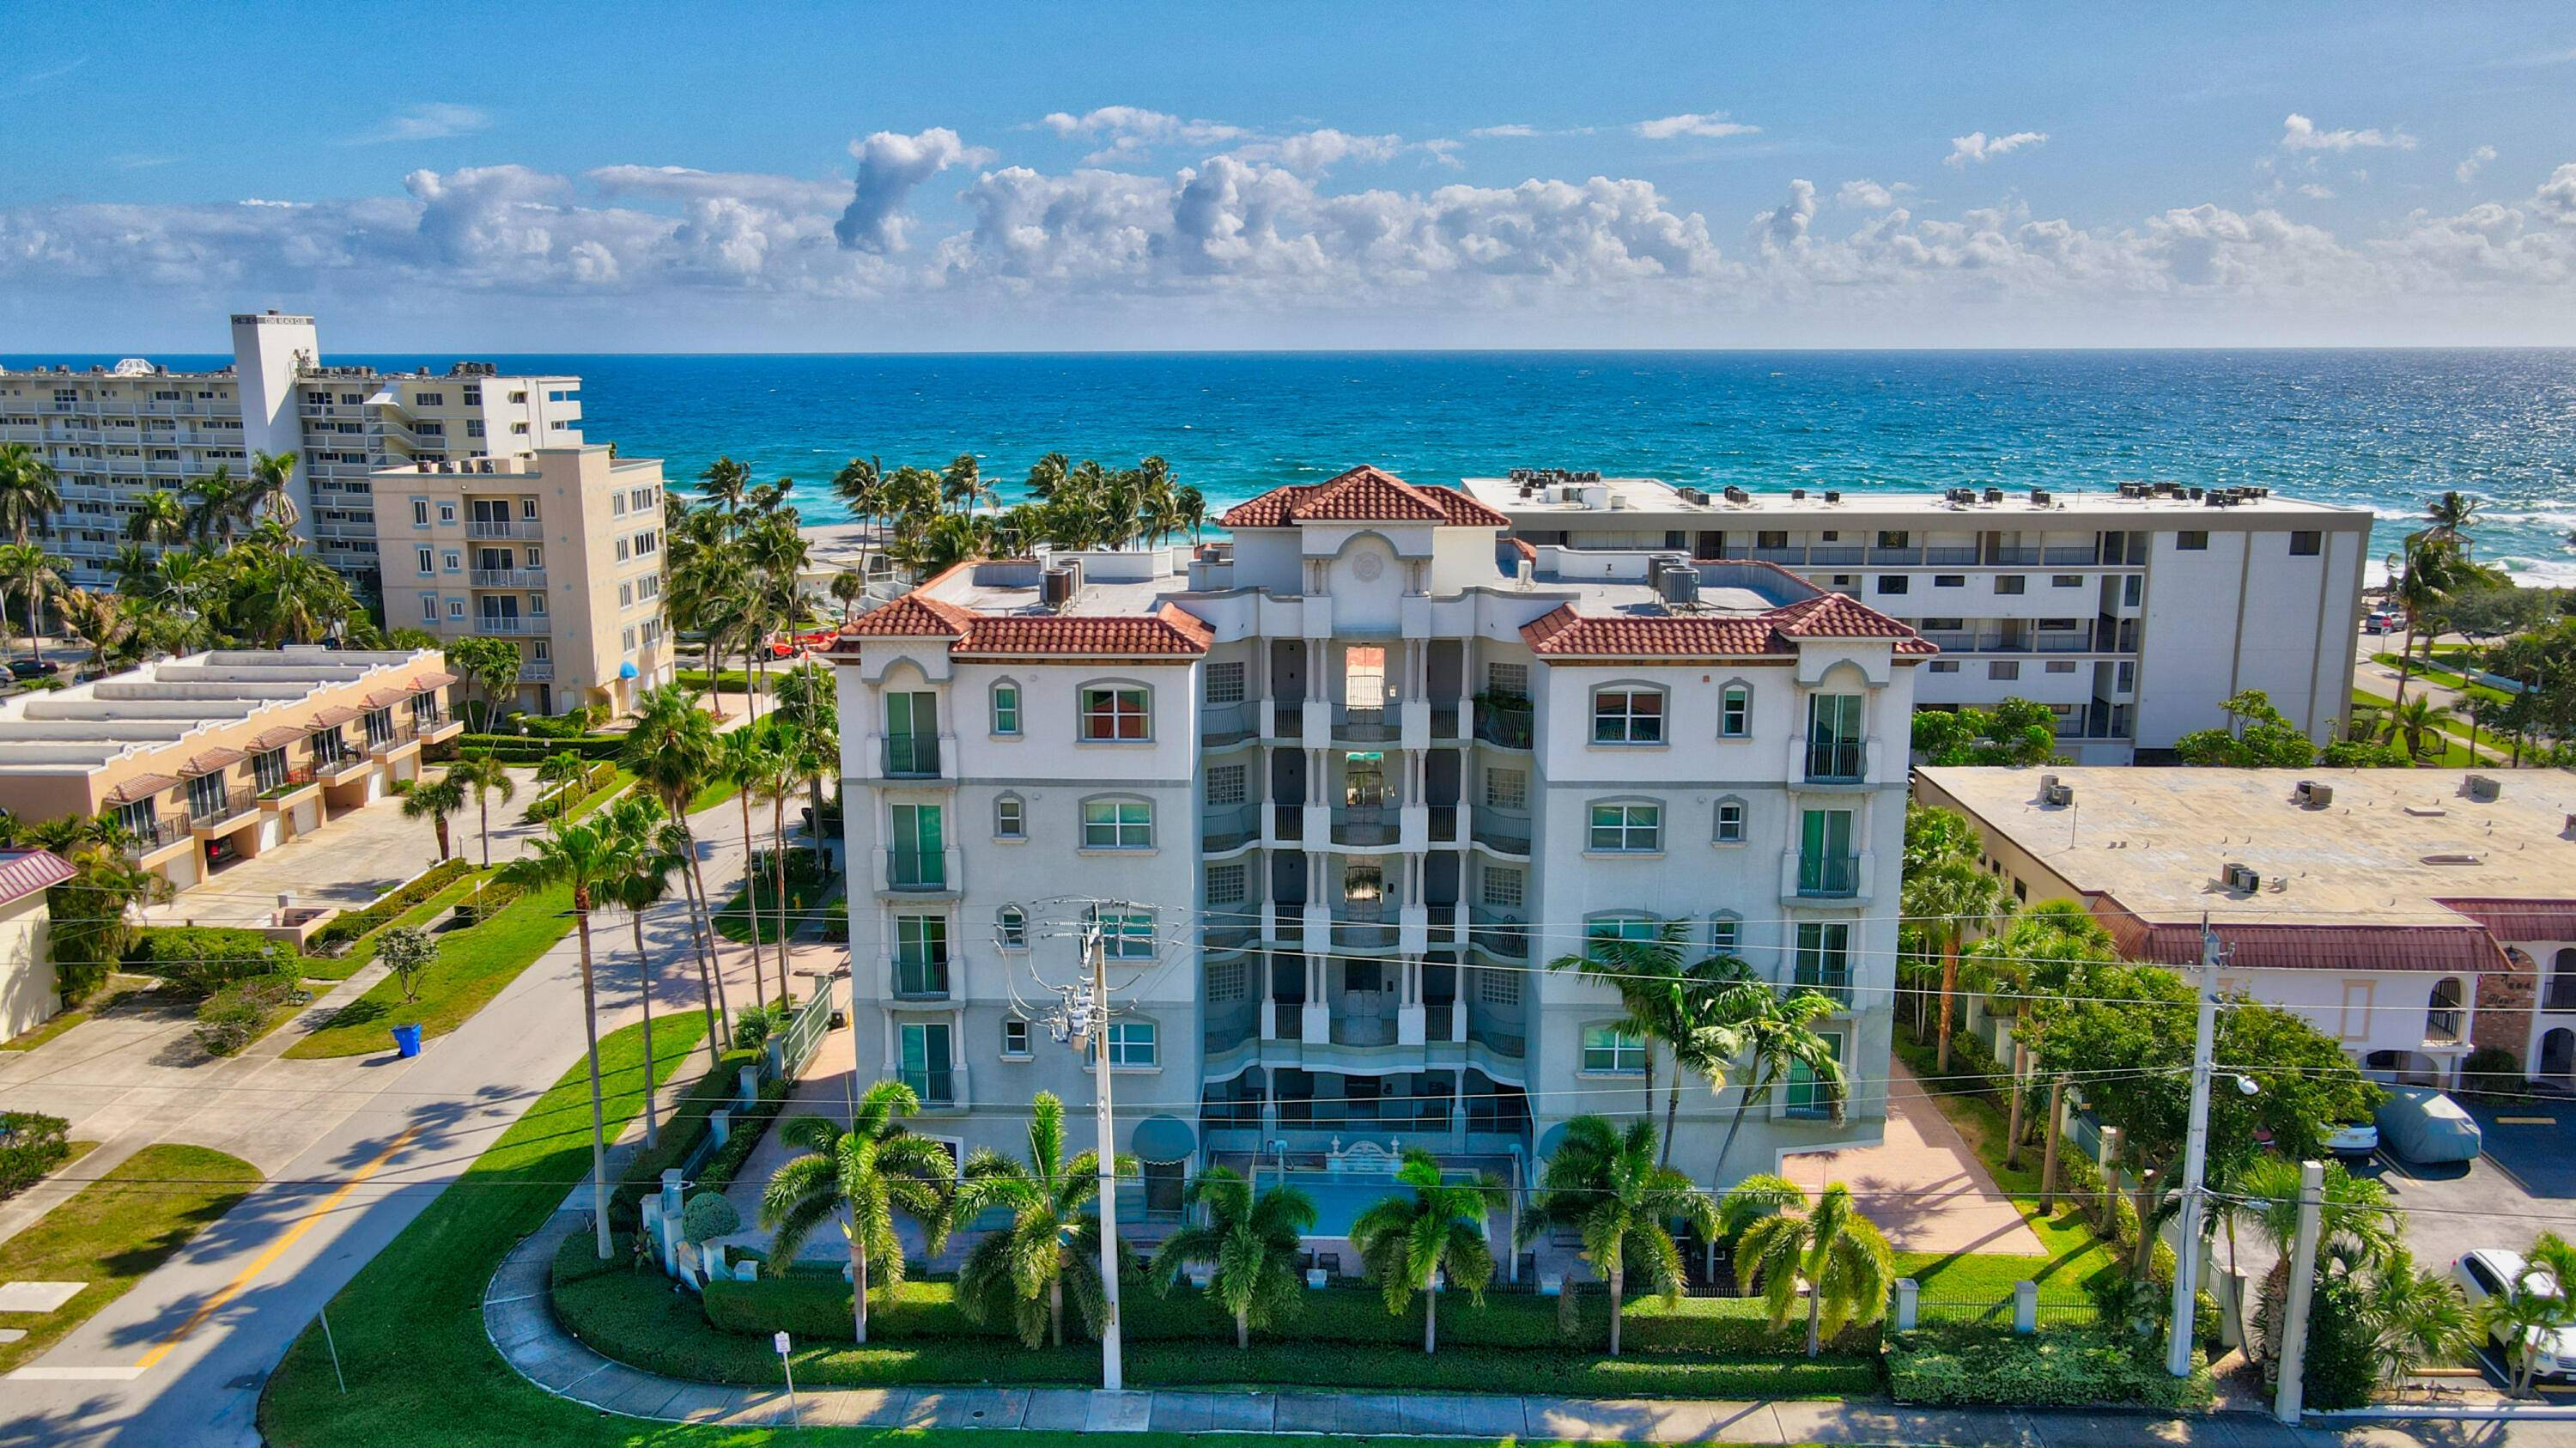 This exquisite 2 bedroom, 2 bathroom condo is located in a desirable boutique building in Deerfield Beach, just one block from the beach.